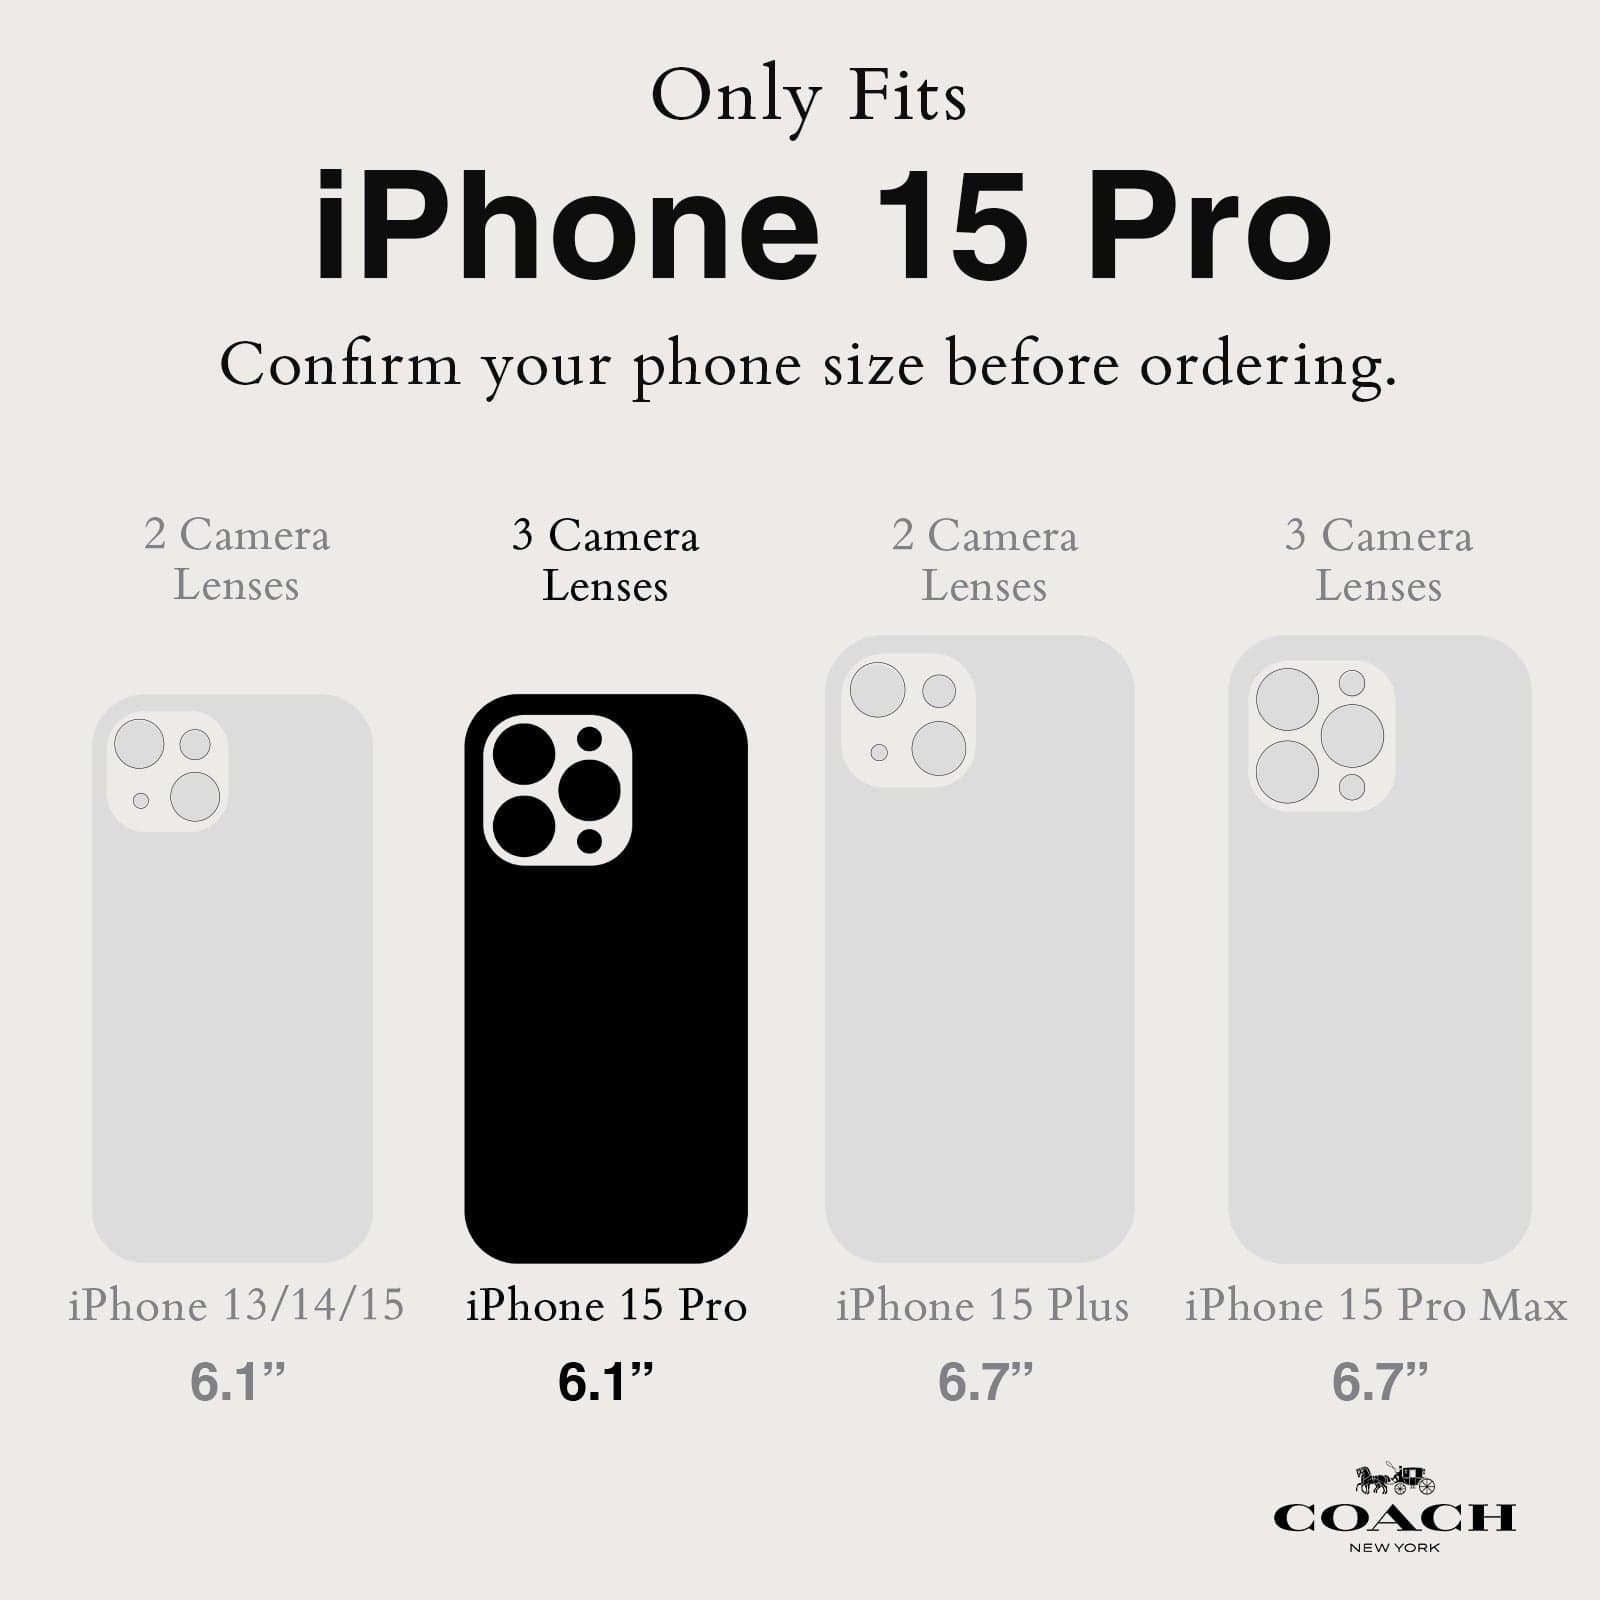 ONLY FITS IPHONE 15 PRO. CONFIRM YOUR PHONE SIZE BEFORE ORDERING